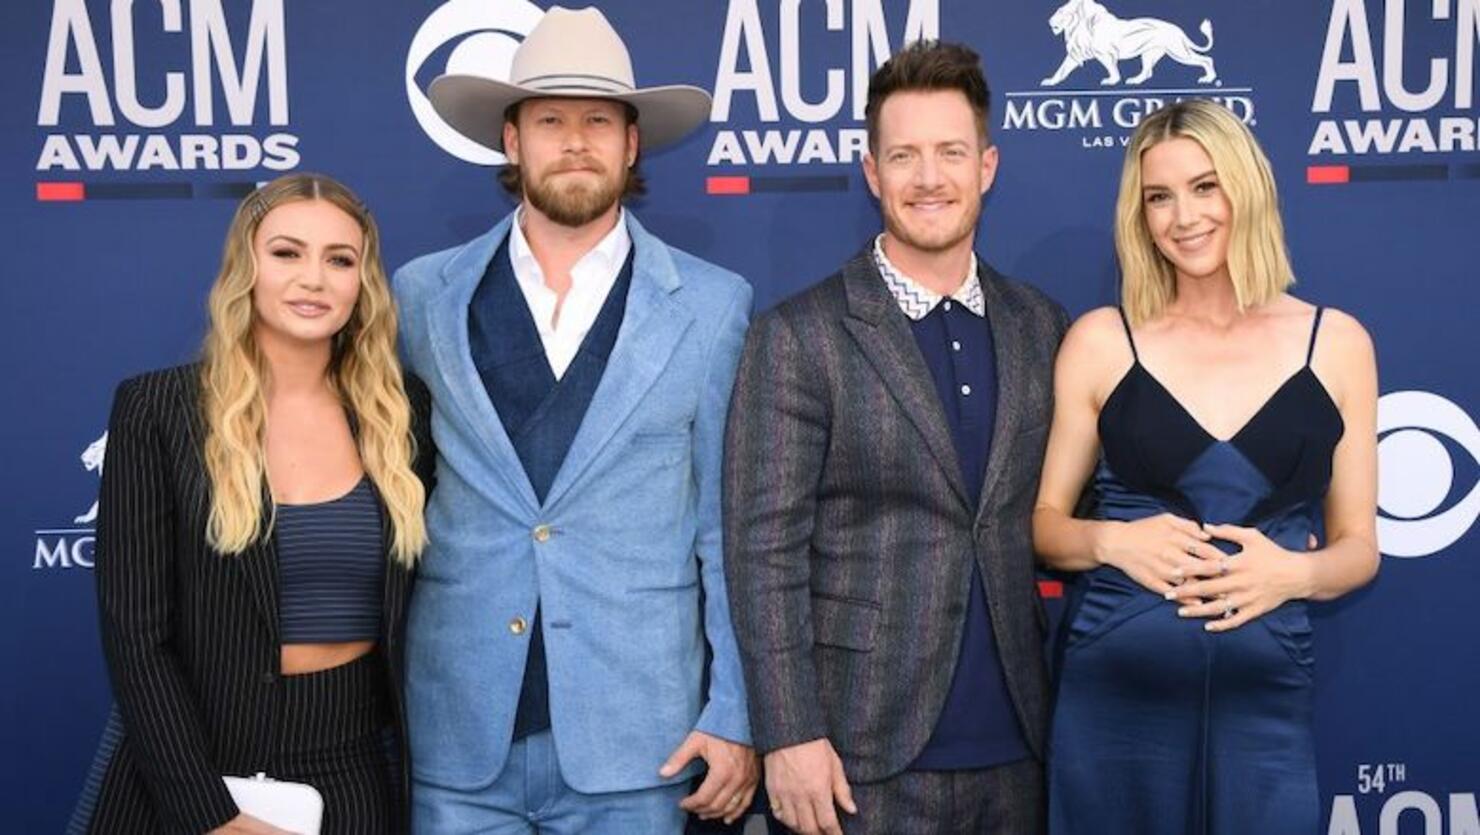 US-ENTERTAINMENT-MUSIC-COUNTRY-AWARD-ARRIVALS